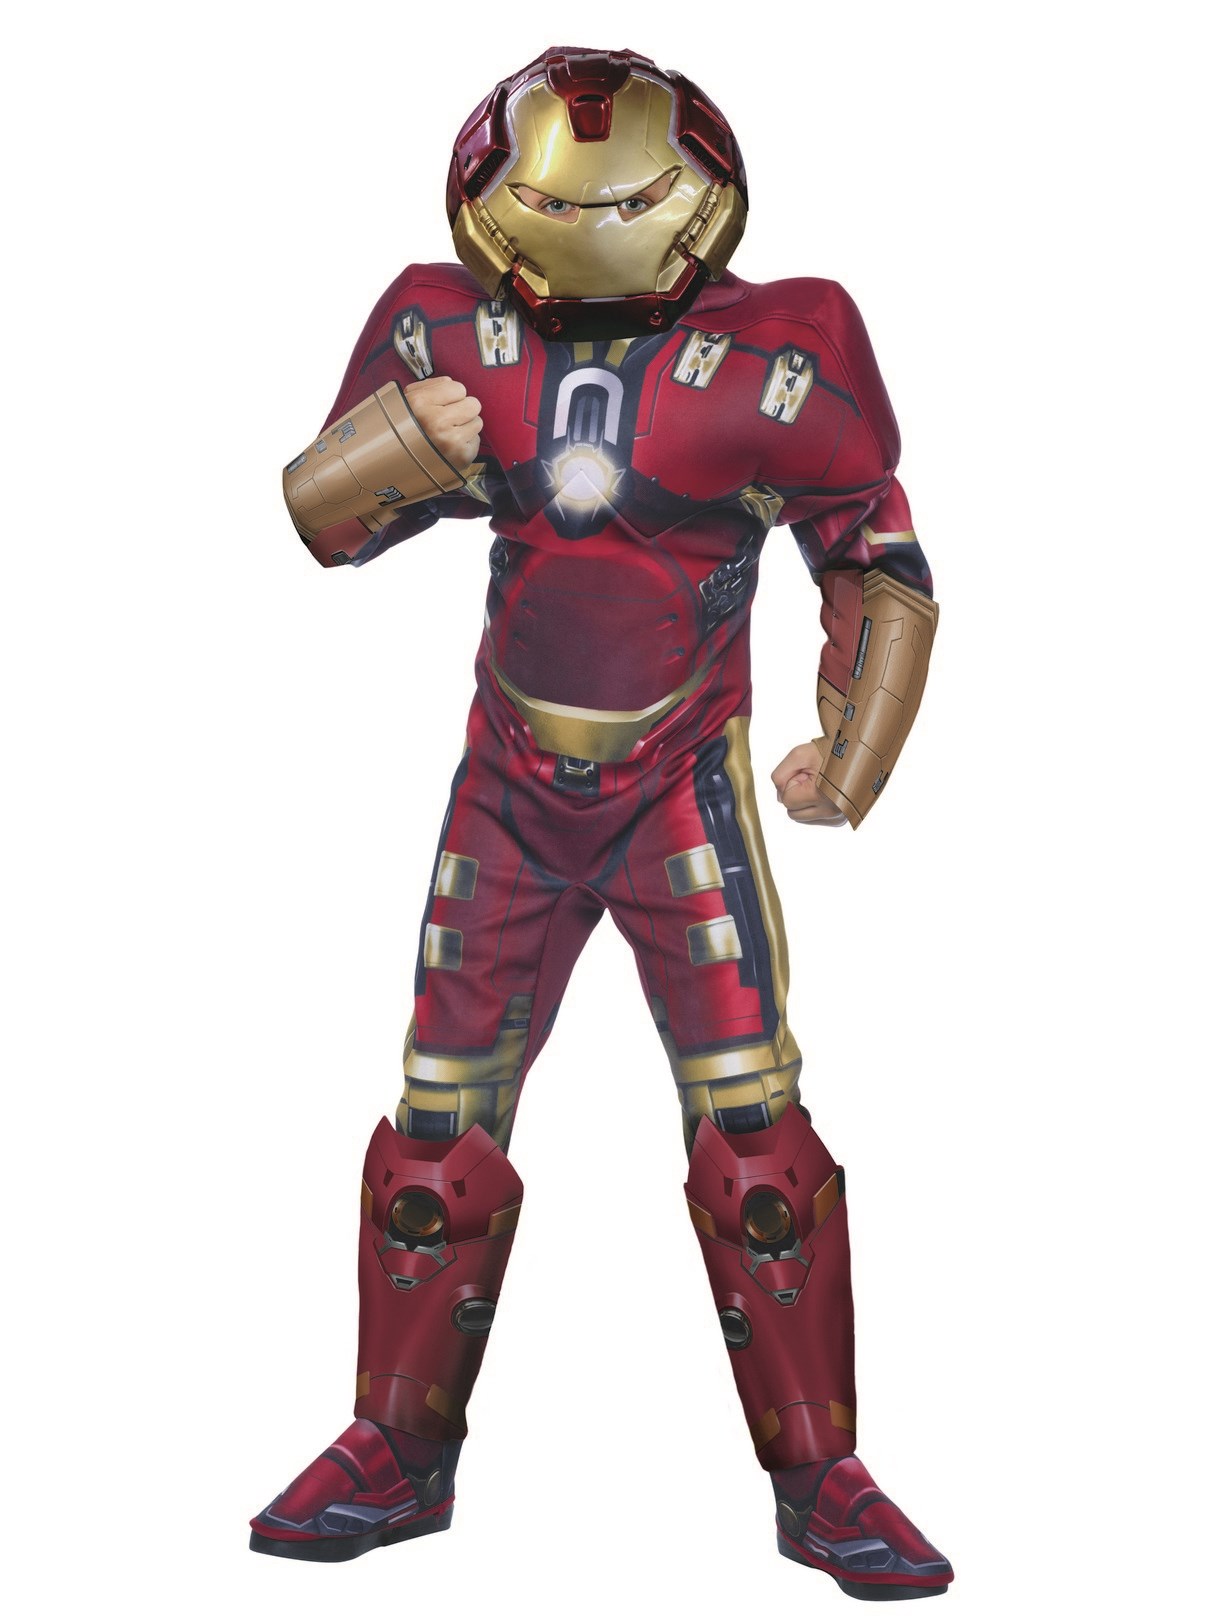 Avengers 2 - Age of Ultron: Deluxe Kids Hulk Buster Costume